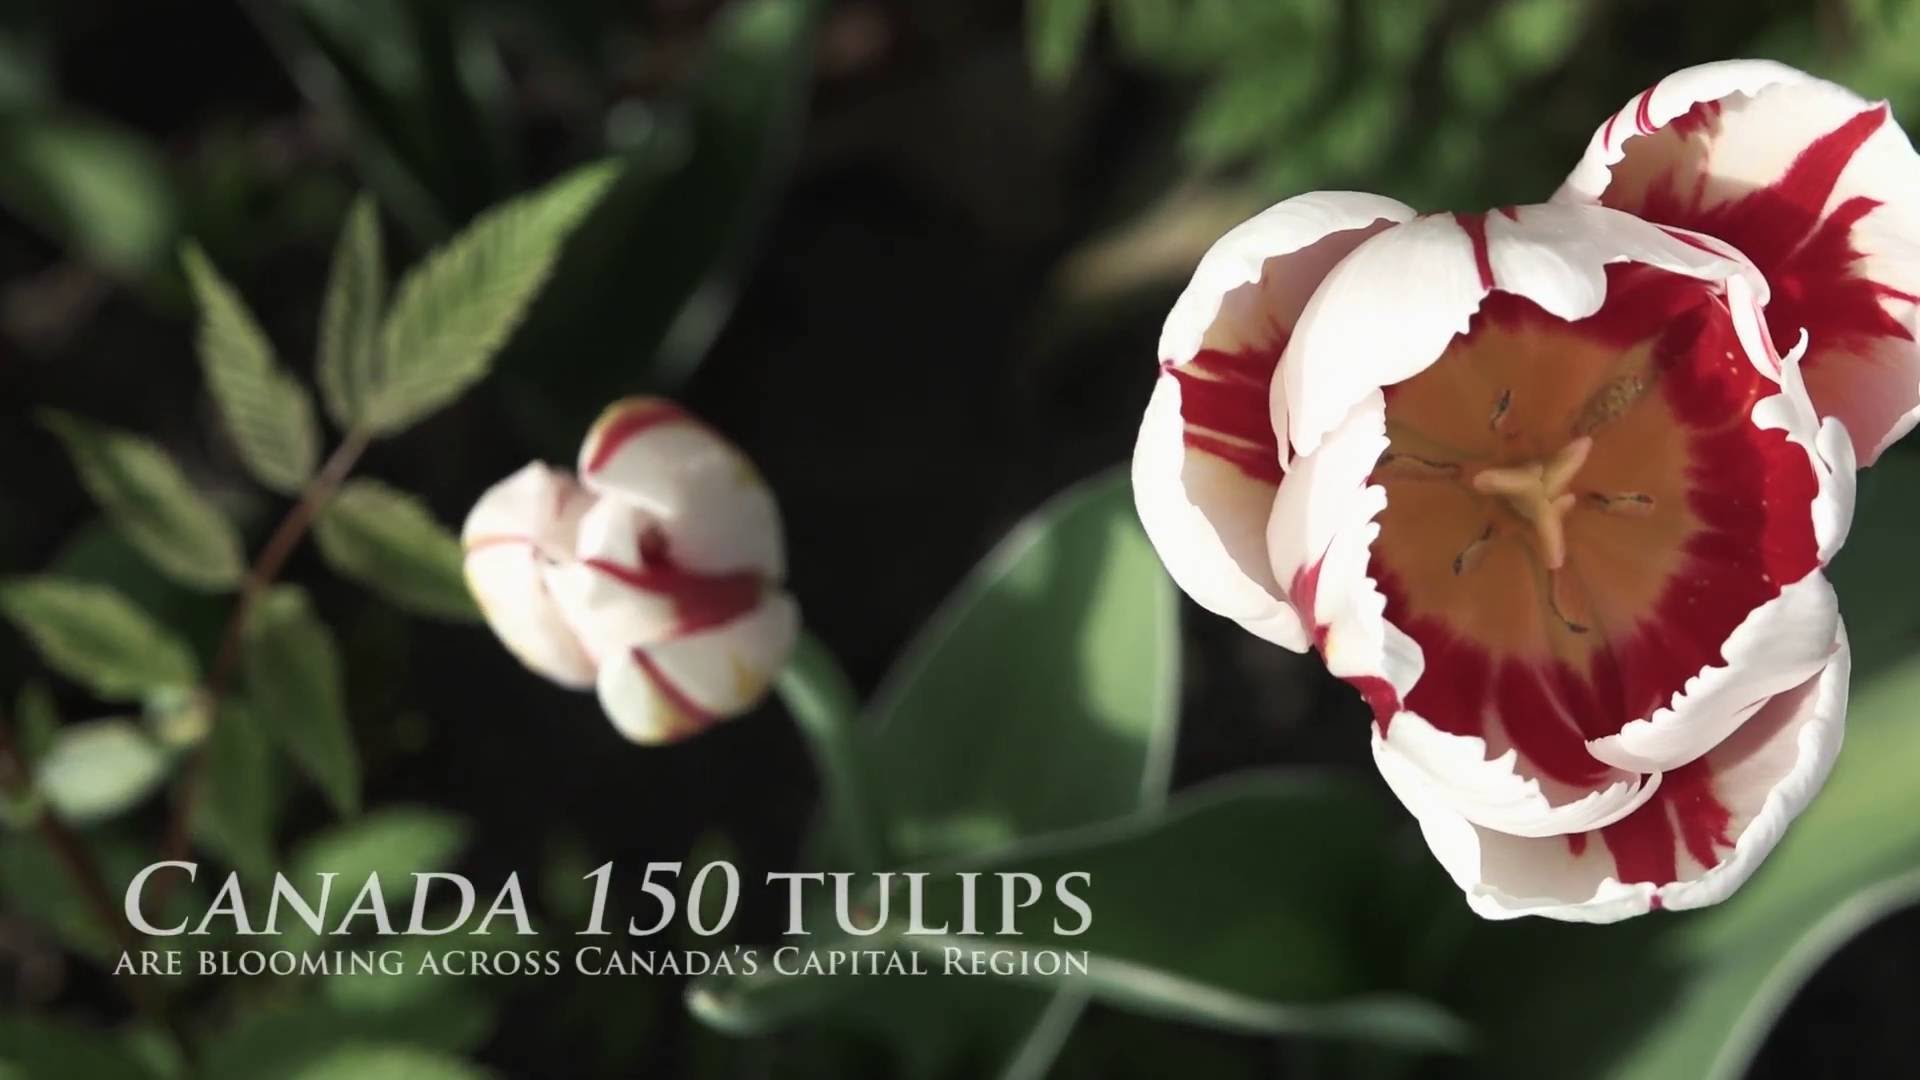 Canada 150 tulips are blooming across Canada's Capital Region - YouTube